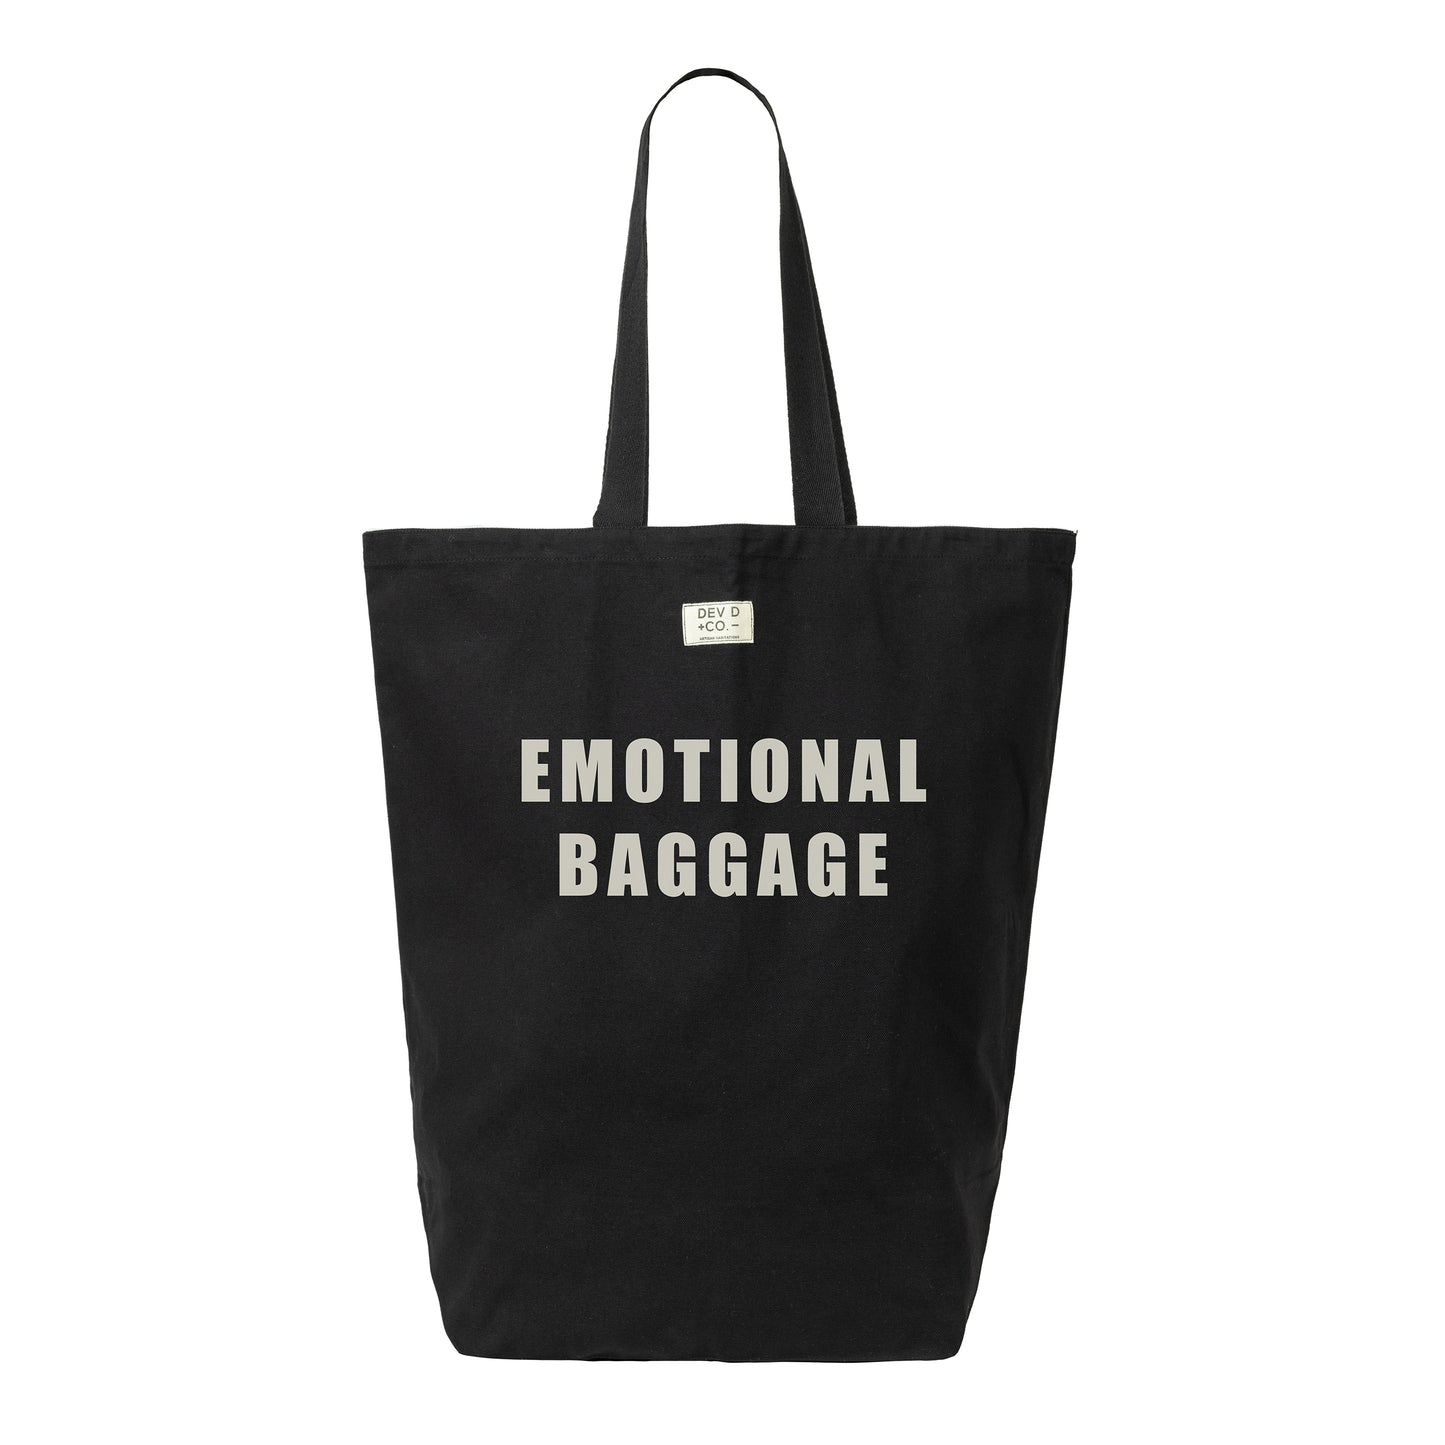 Emotional Baggage - Canvas Tote Bag with Pocket - Large Tote